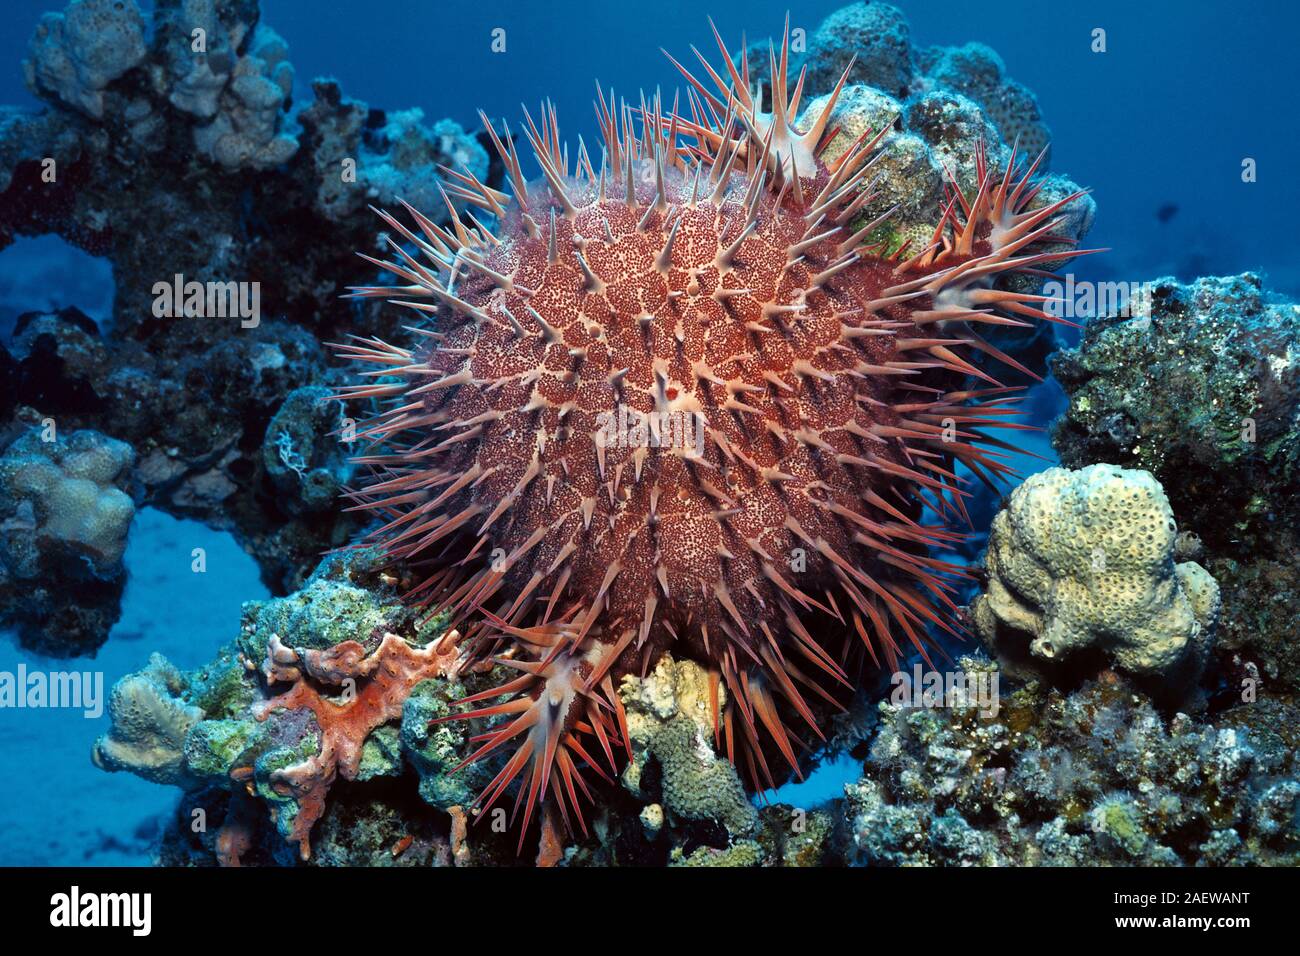 Crown of thorns starfish (Acanthaster planci) feeds polyps of a stone coral, Hurghada, Egypt Stock Photo